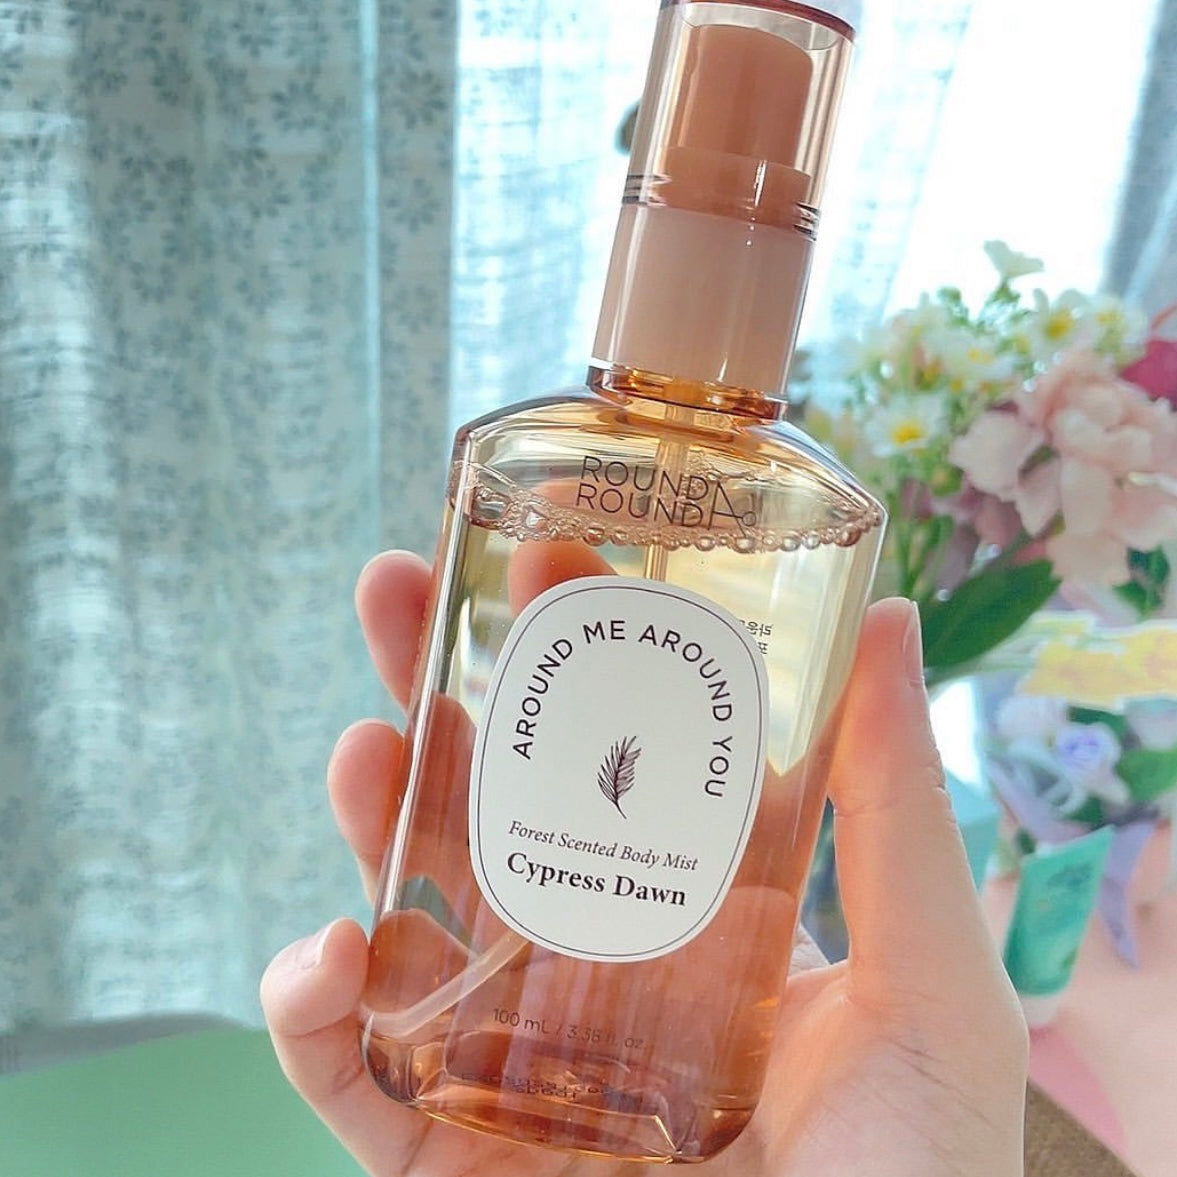 Round A Round 草本香水身體保濕噴霧 Forest Scented Body Mist🌿